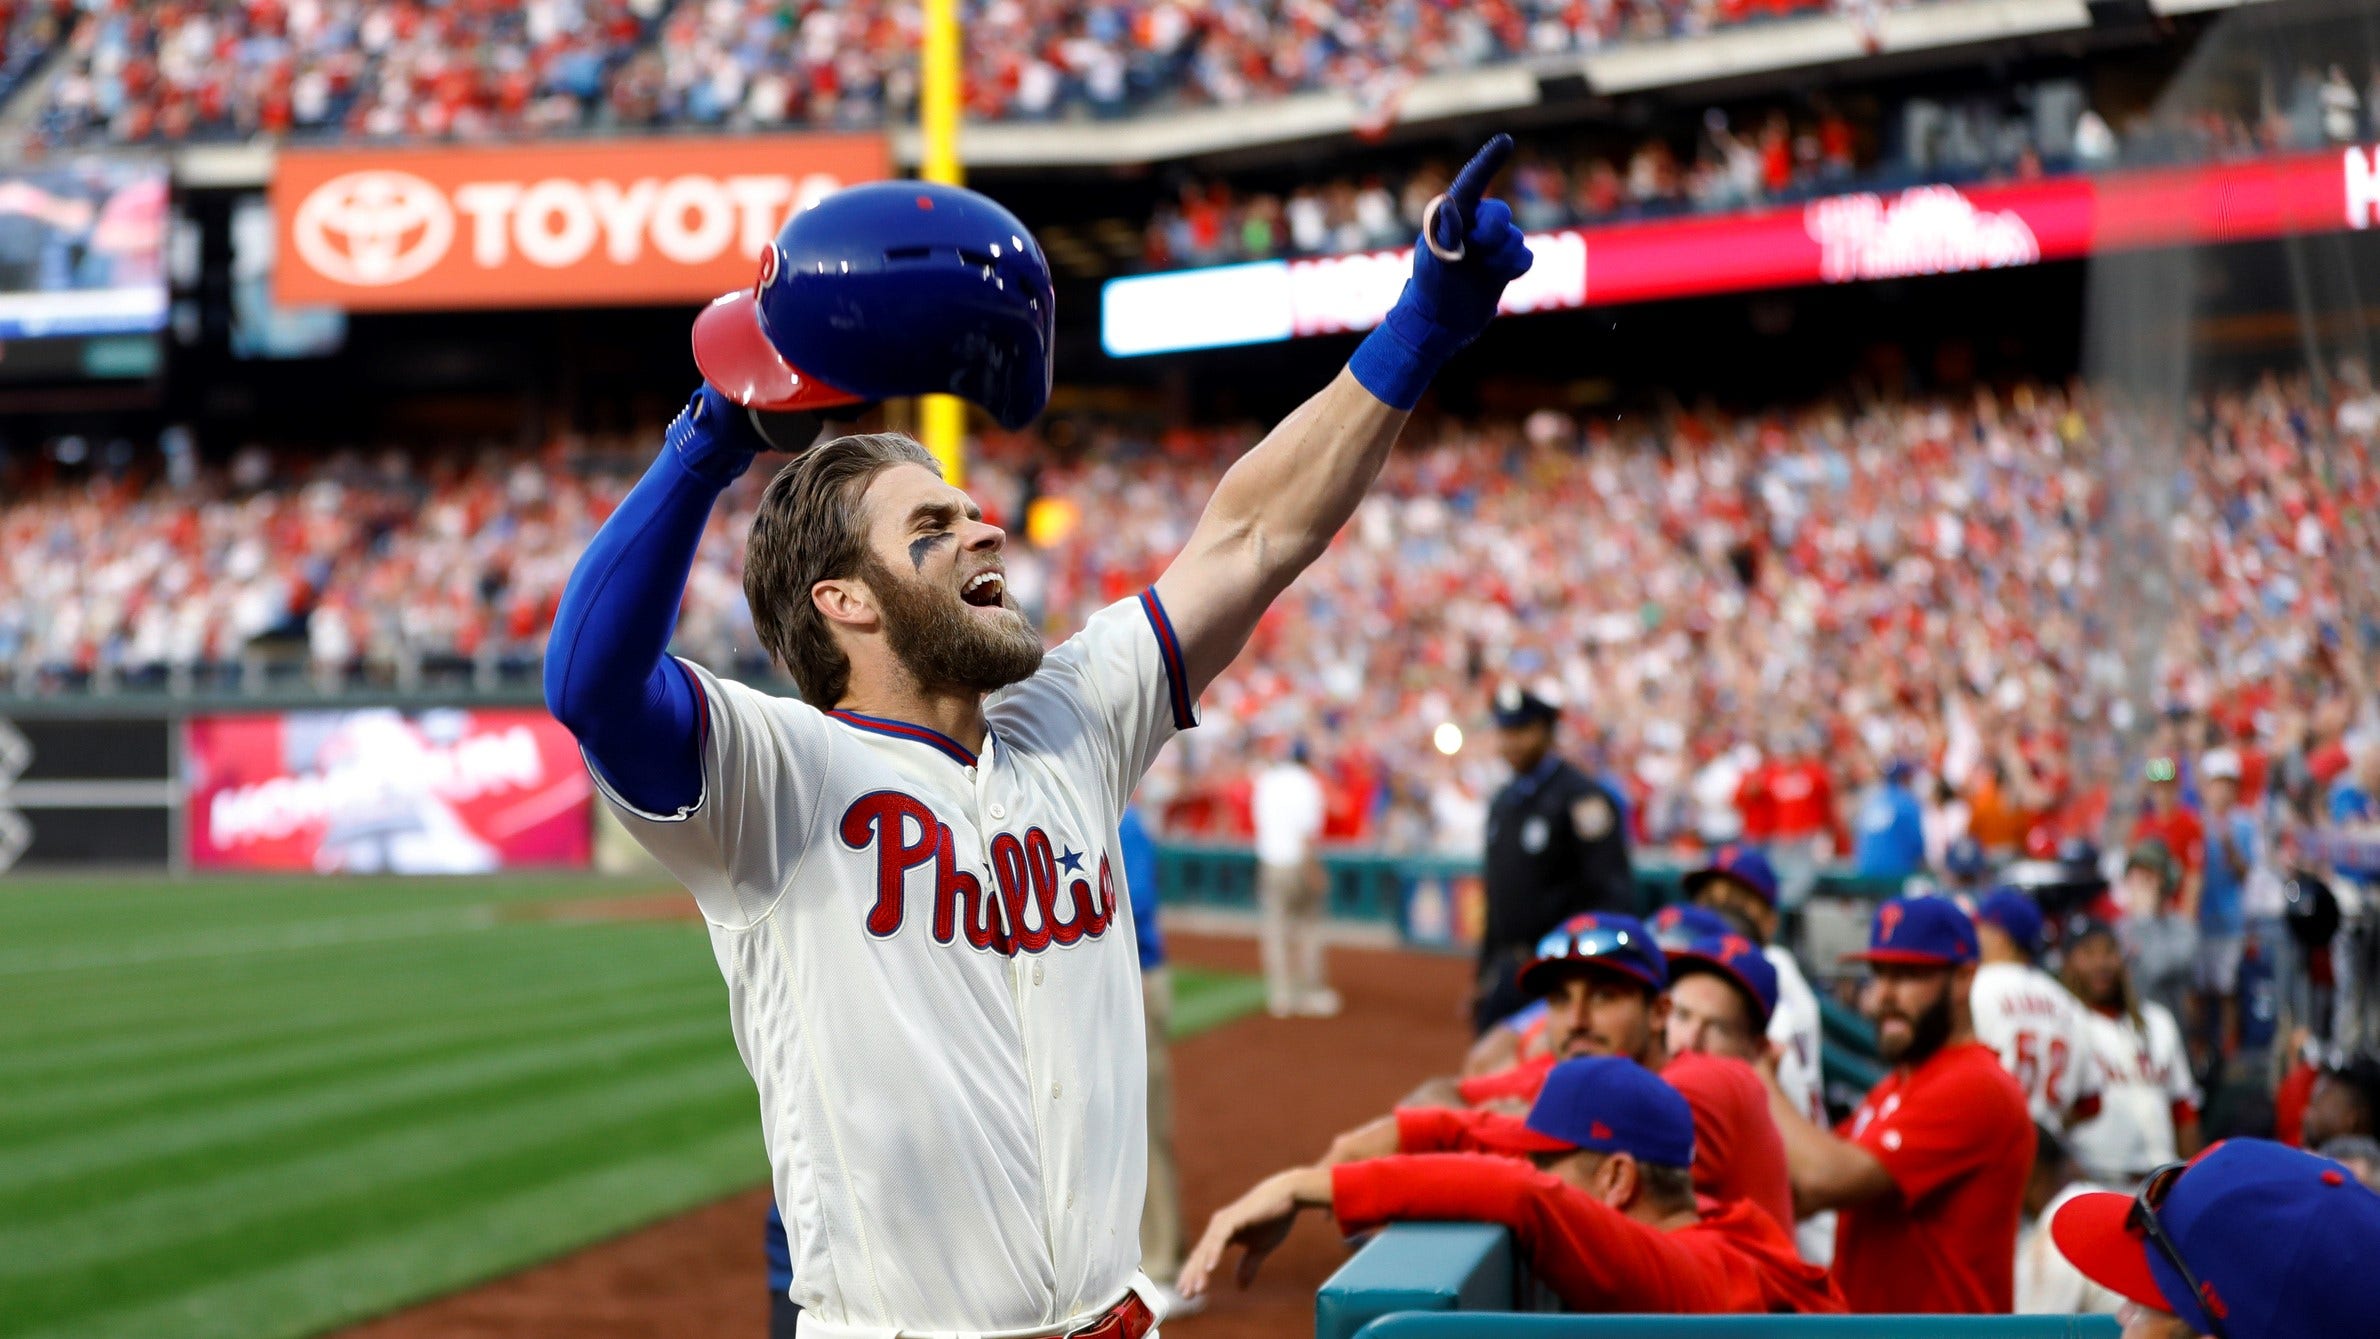 IS BRYCE HARPER LIVING UP TO HIS $330M BARGAIN WITH THE PHILS?